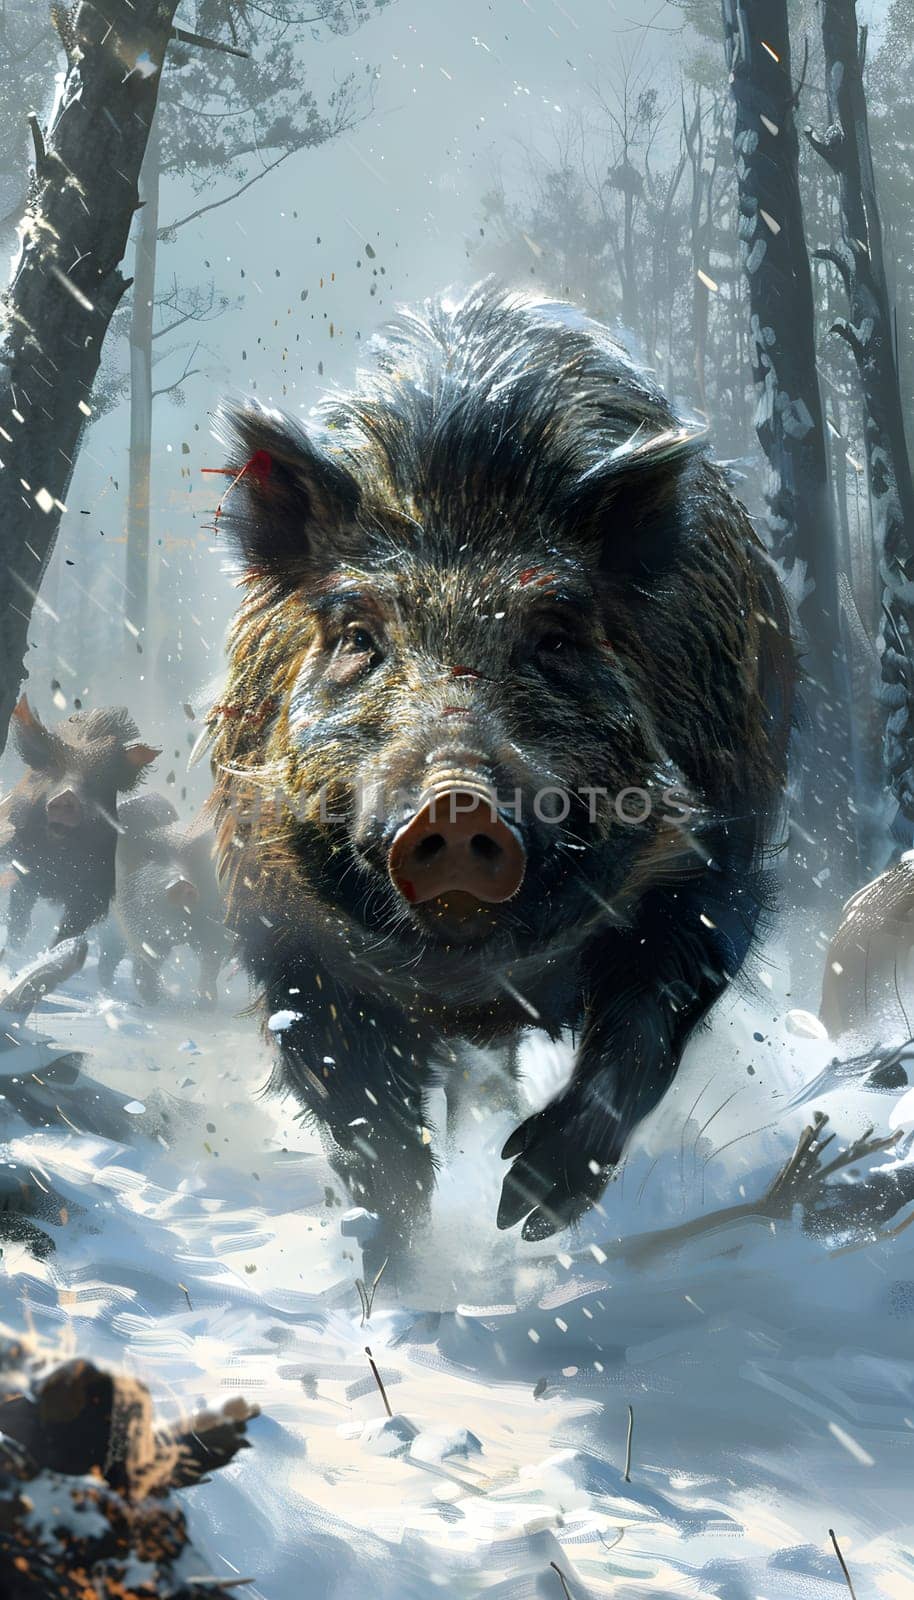 A Carnivore with a powerful snout, a wild boar, is seen running through the snowy woods. This Terrestrial animal belongs to the Sporting Group in wildlife